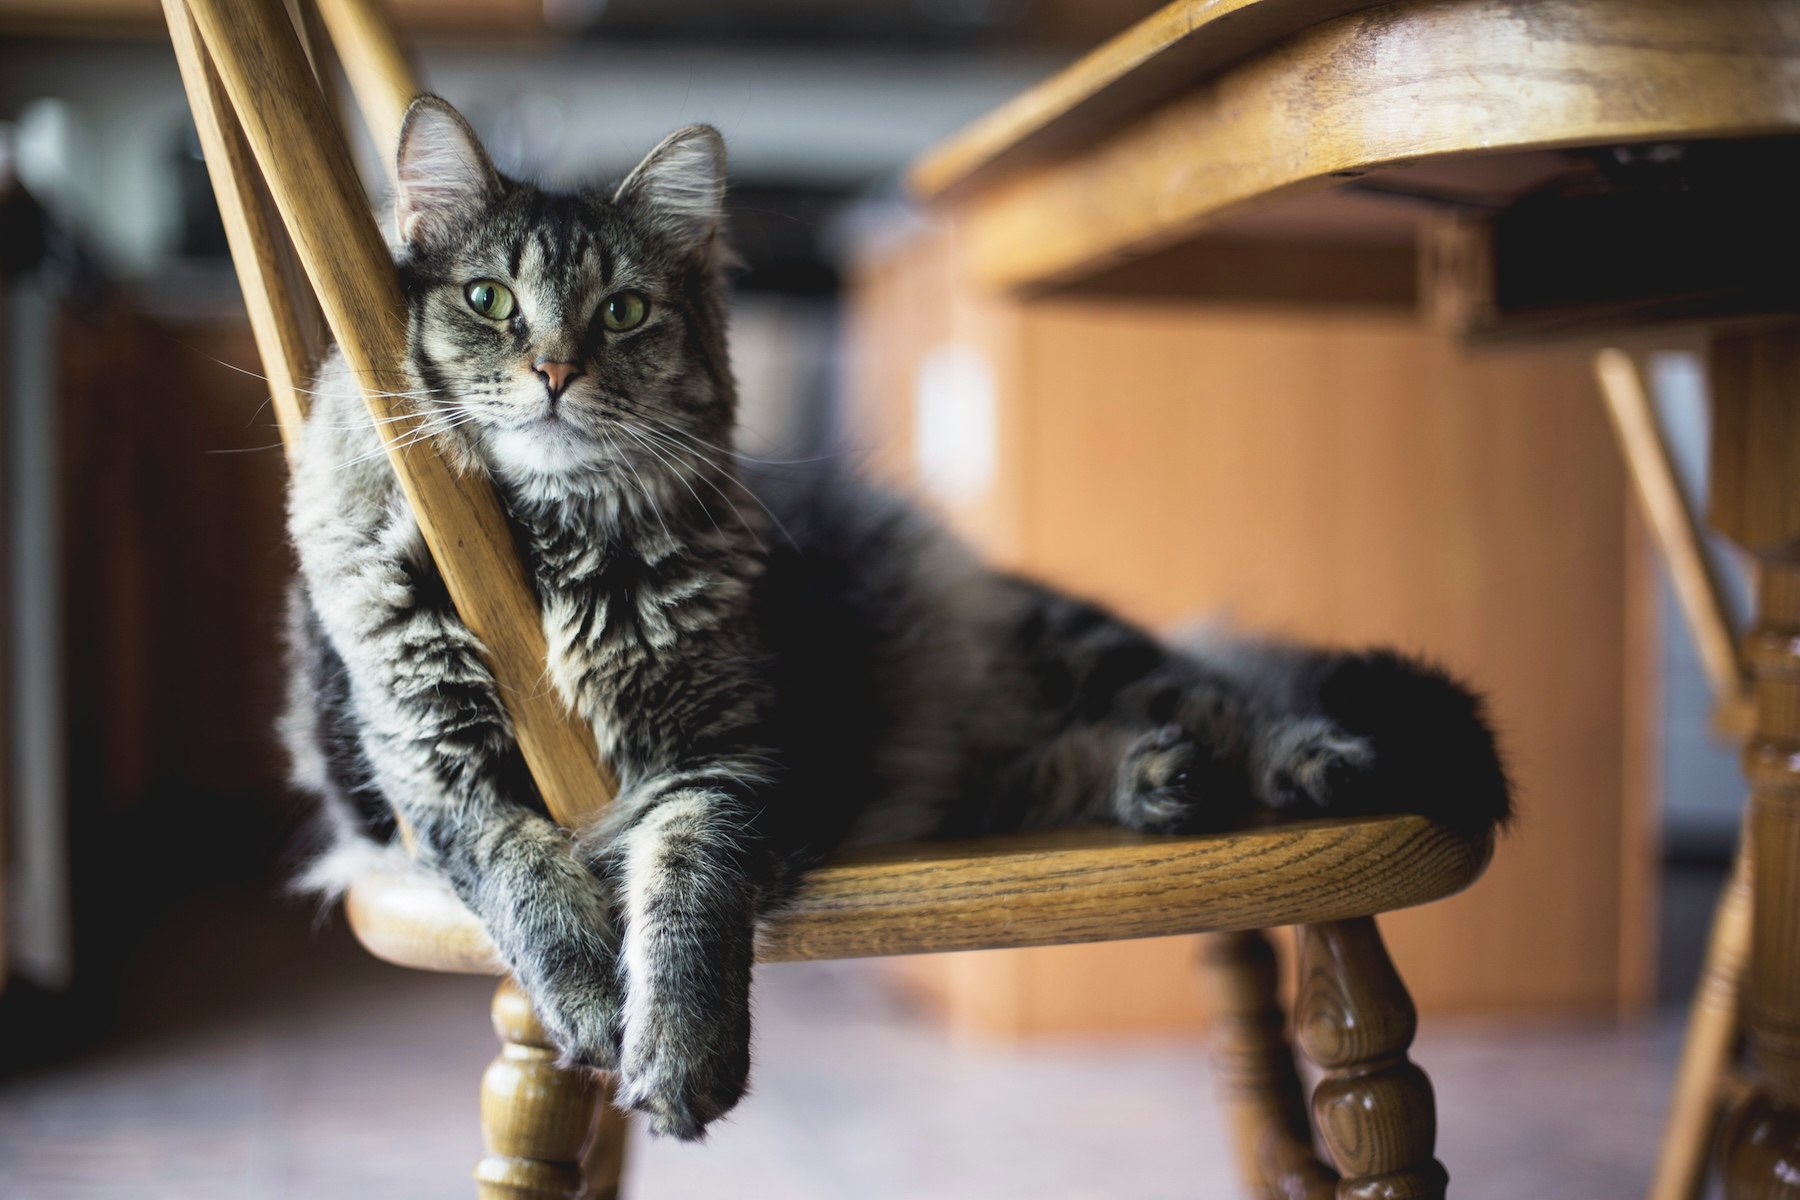 A majestic long-haired house cat lies leisurely on a wooden dining chair